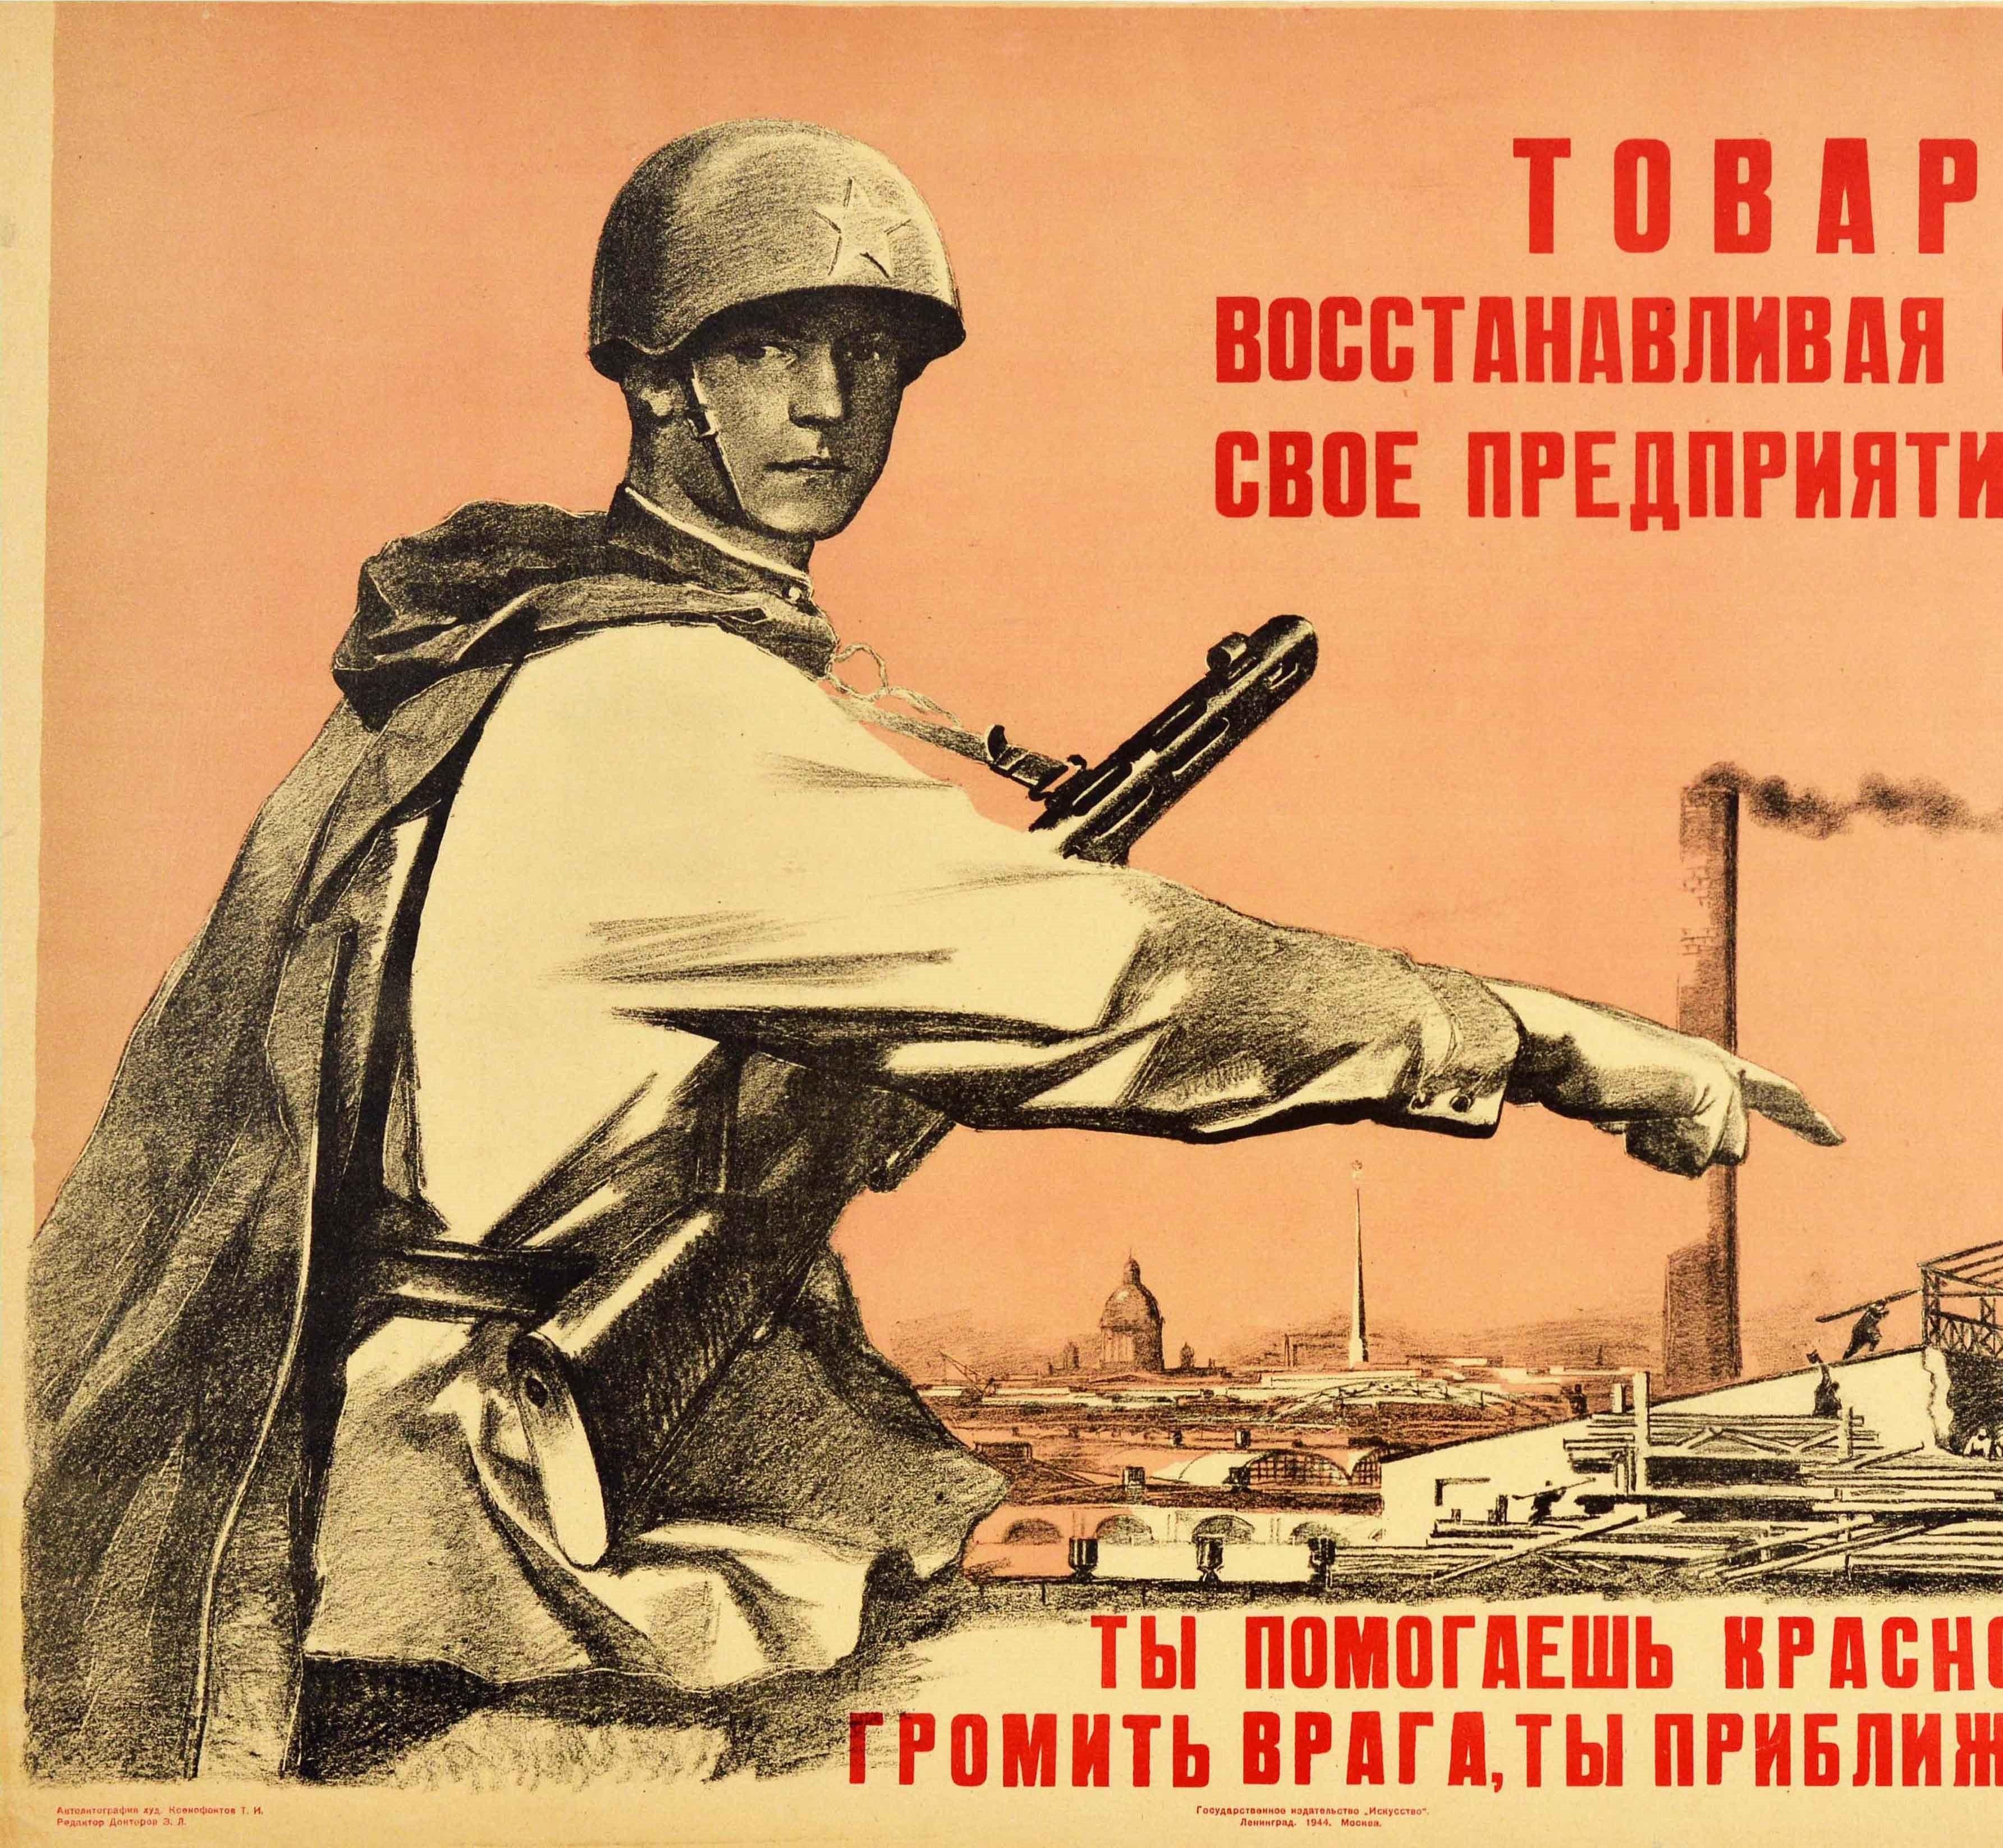 Original vintage Soviet propaganda poster encouraging the viewer to rebuild factories and industries damaged during World War Two - T??????! ?????????????? ???? ?????, ???? ??????????? ?? ????????? ??????? ????? ??????? ?????, ?? ??????????? ??????!